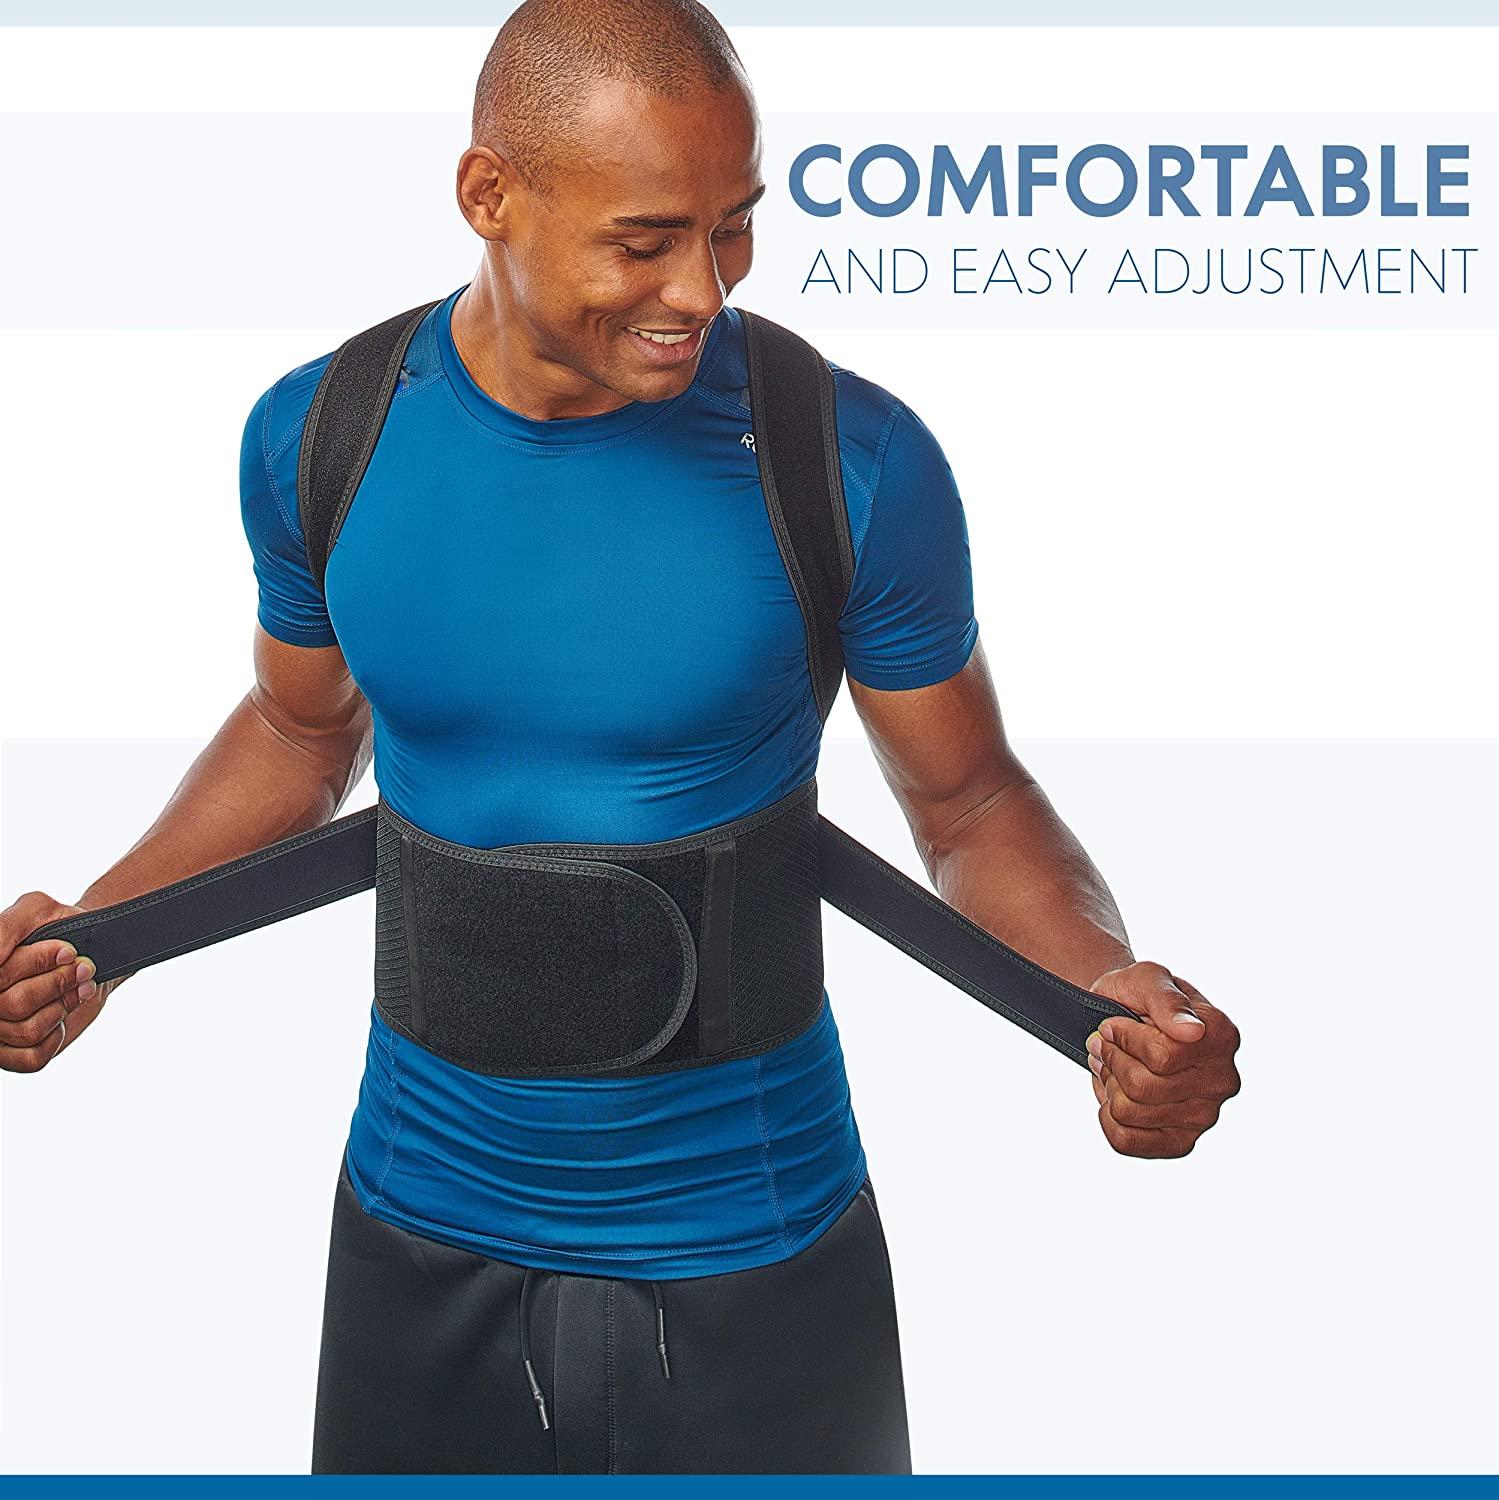 Back Brace Posture Corrector Back Braces for Upper and Lower Back Pain  Relief